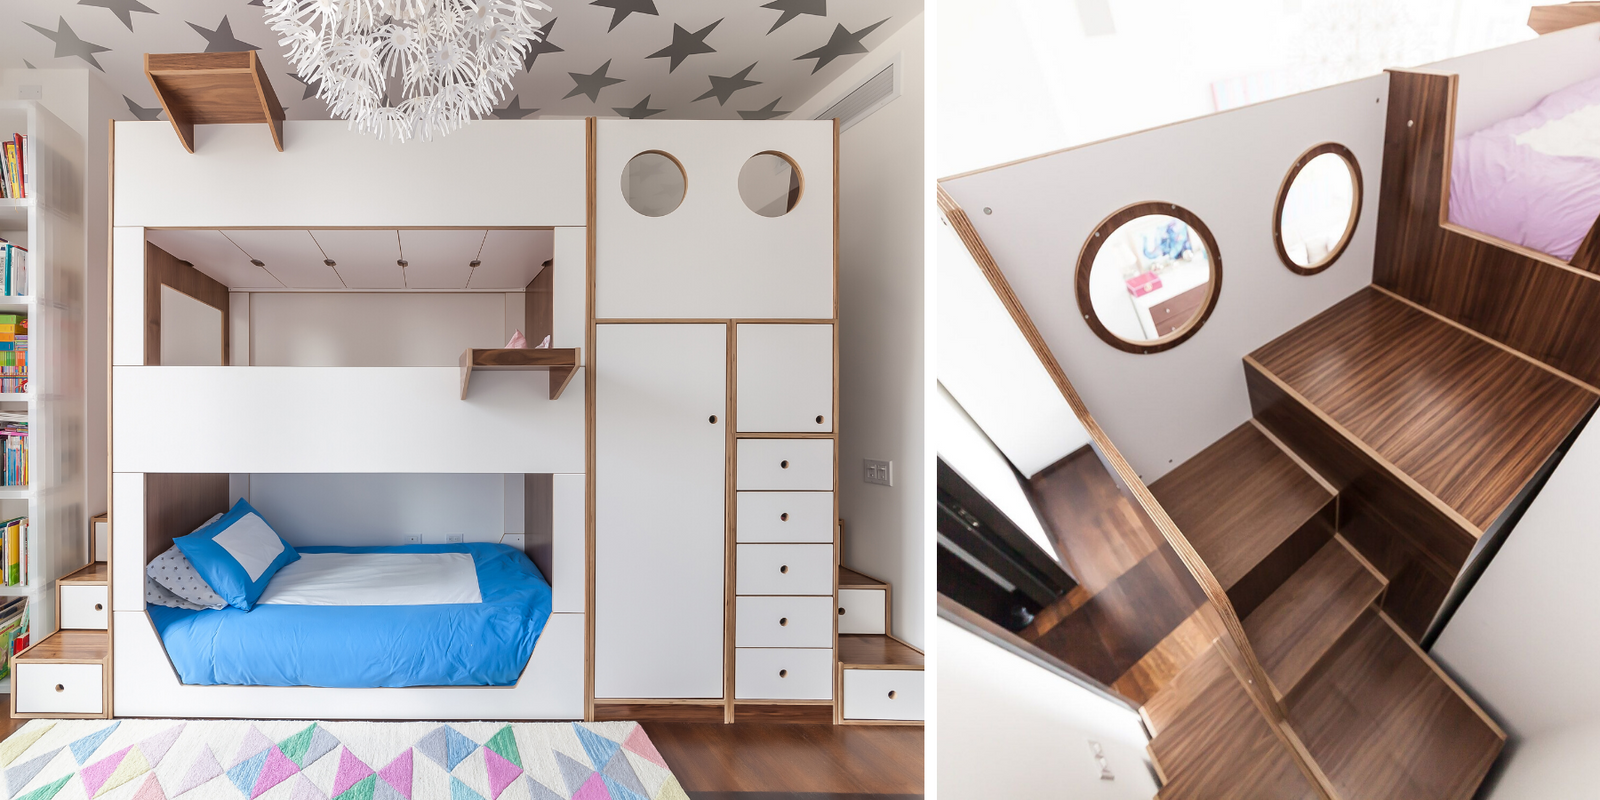 m and s kids beds